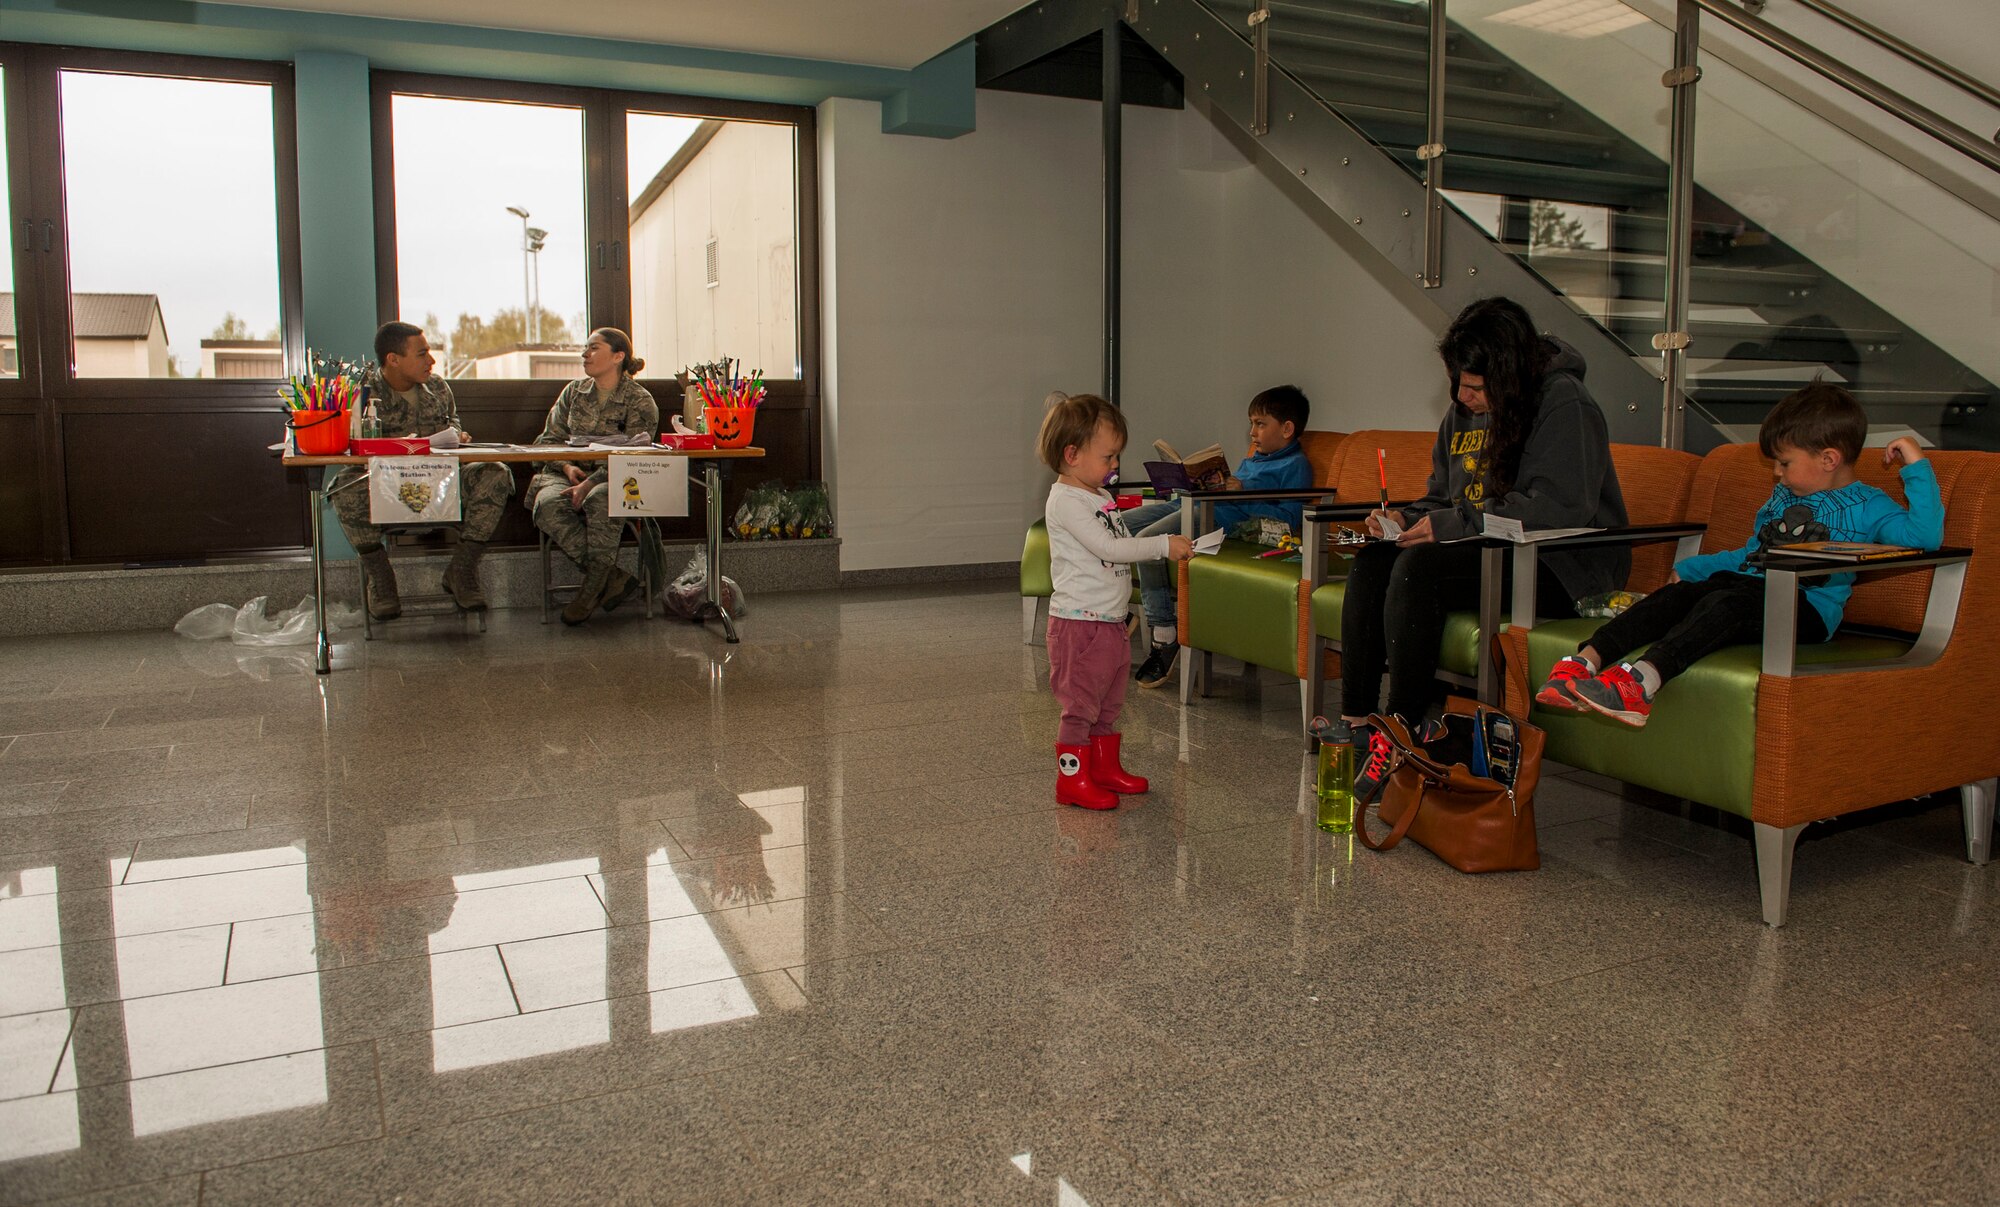 Family members of the 52nd Fighter Wing wait in the 52nd Dental Squadron’s lobby room during the dental clinic’s semi-annual children’s walk-in at Spangdahlem Air Base, Germany, April 22, 2016. Families received information regarding diets that contribute to healthy oral hygiene. (U.S. Air Force photo by Airman 1st Class Timothy Kim/Released)